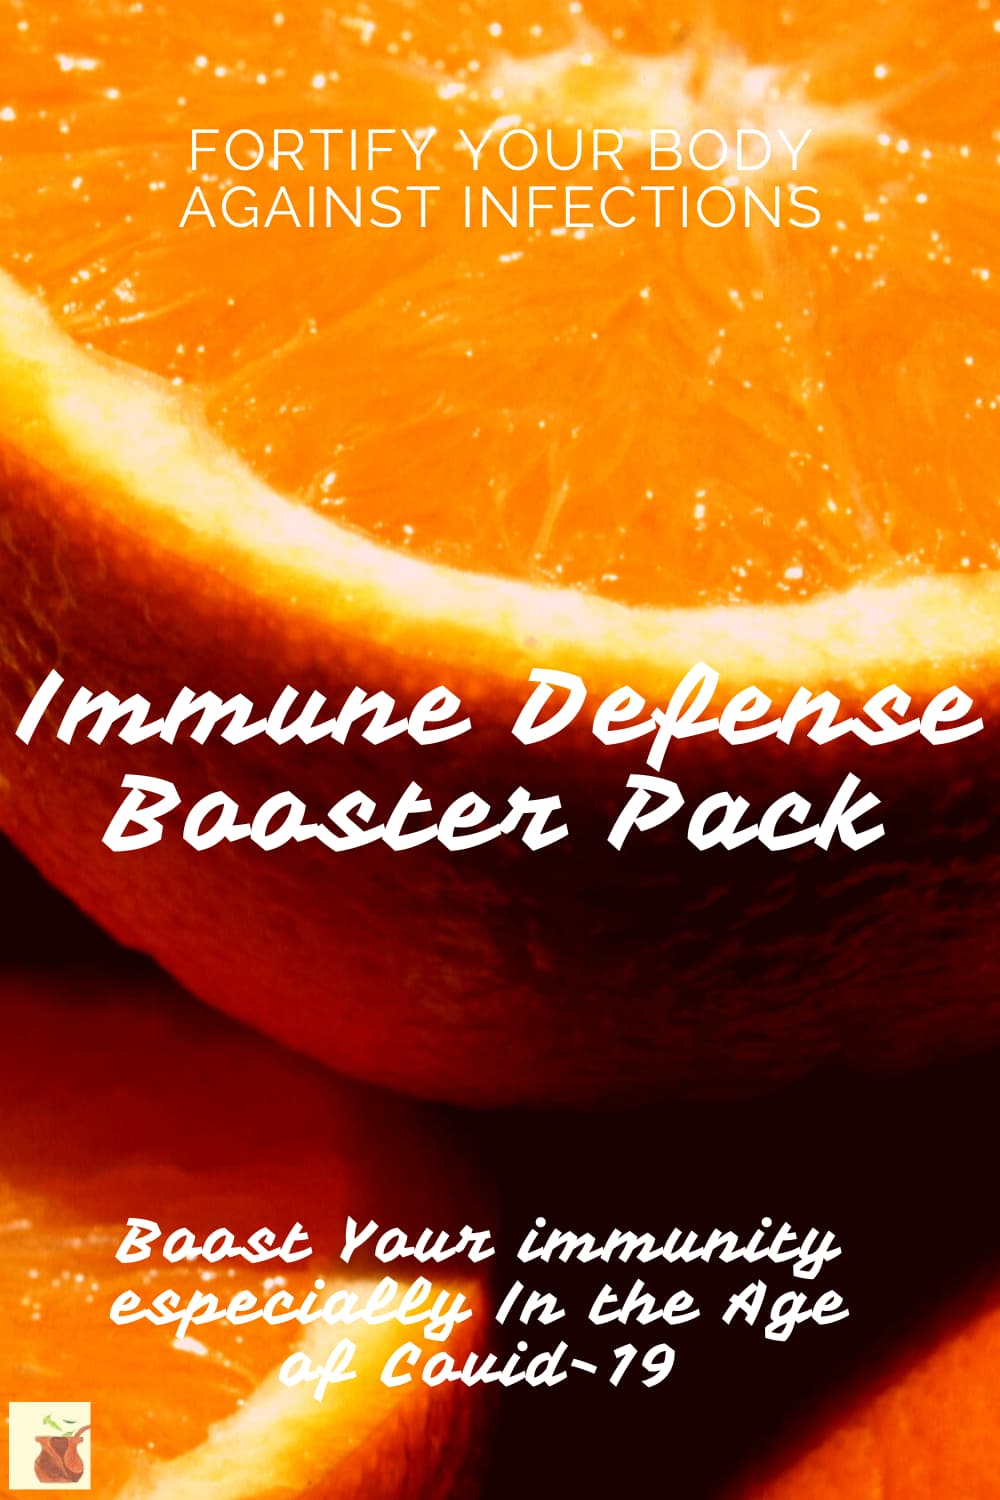 Immune System Booster Pack